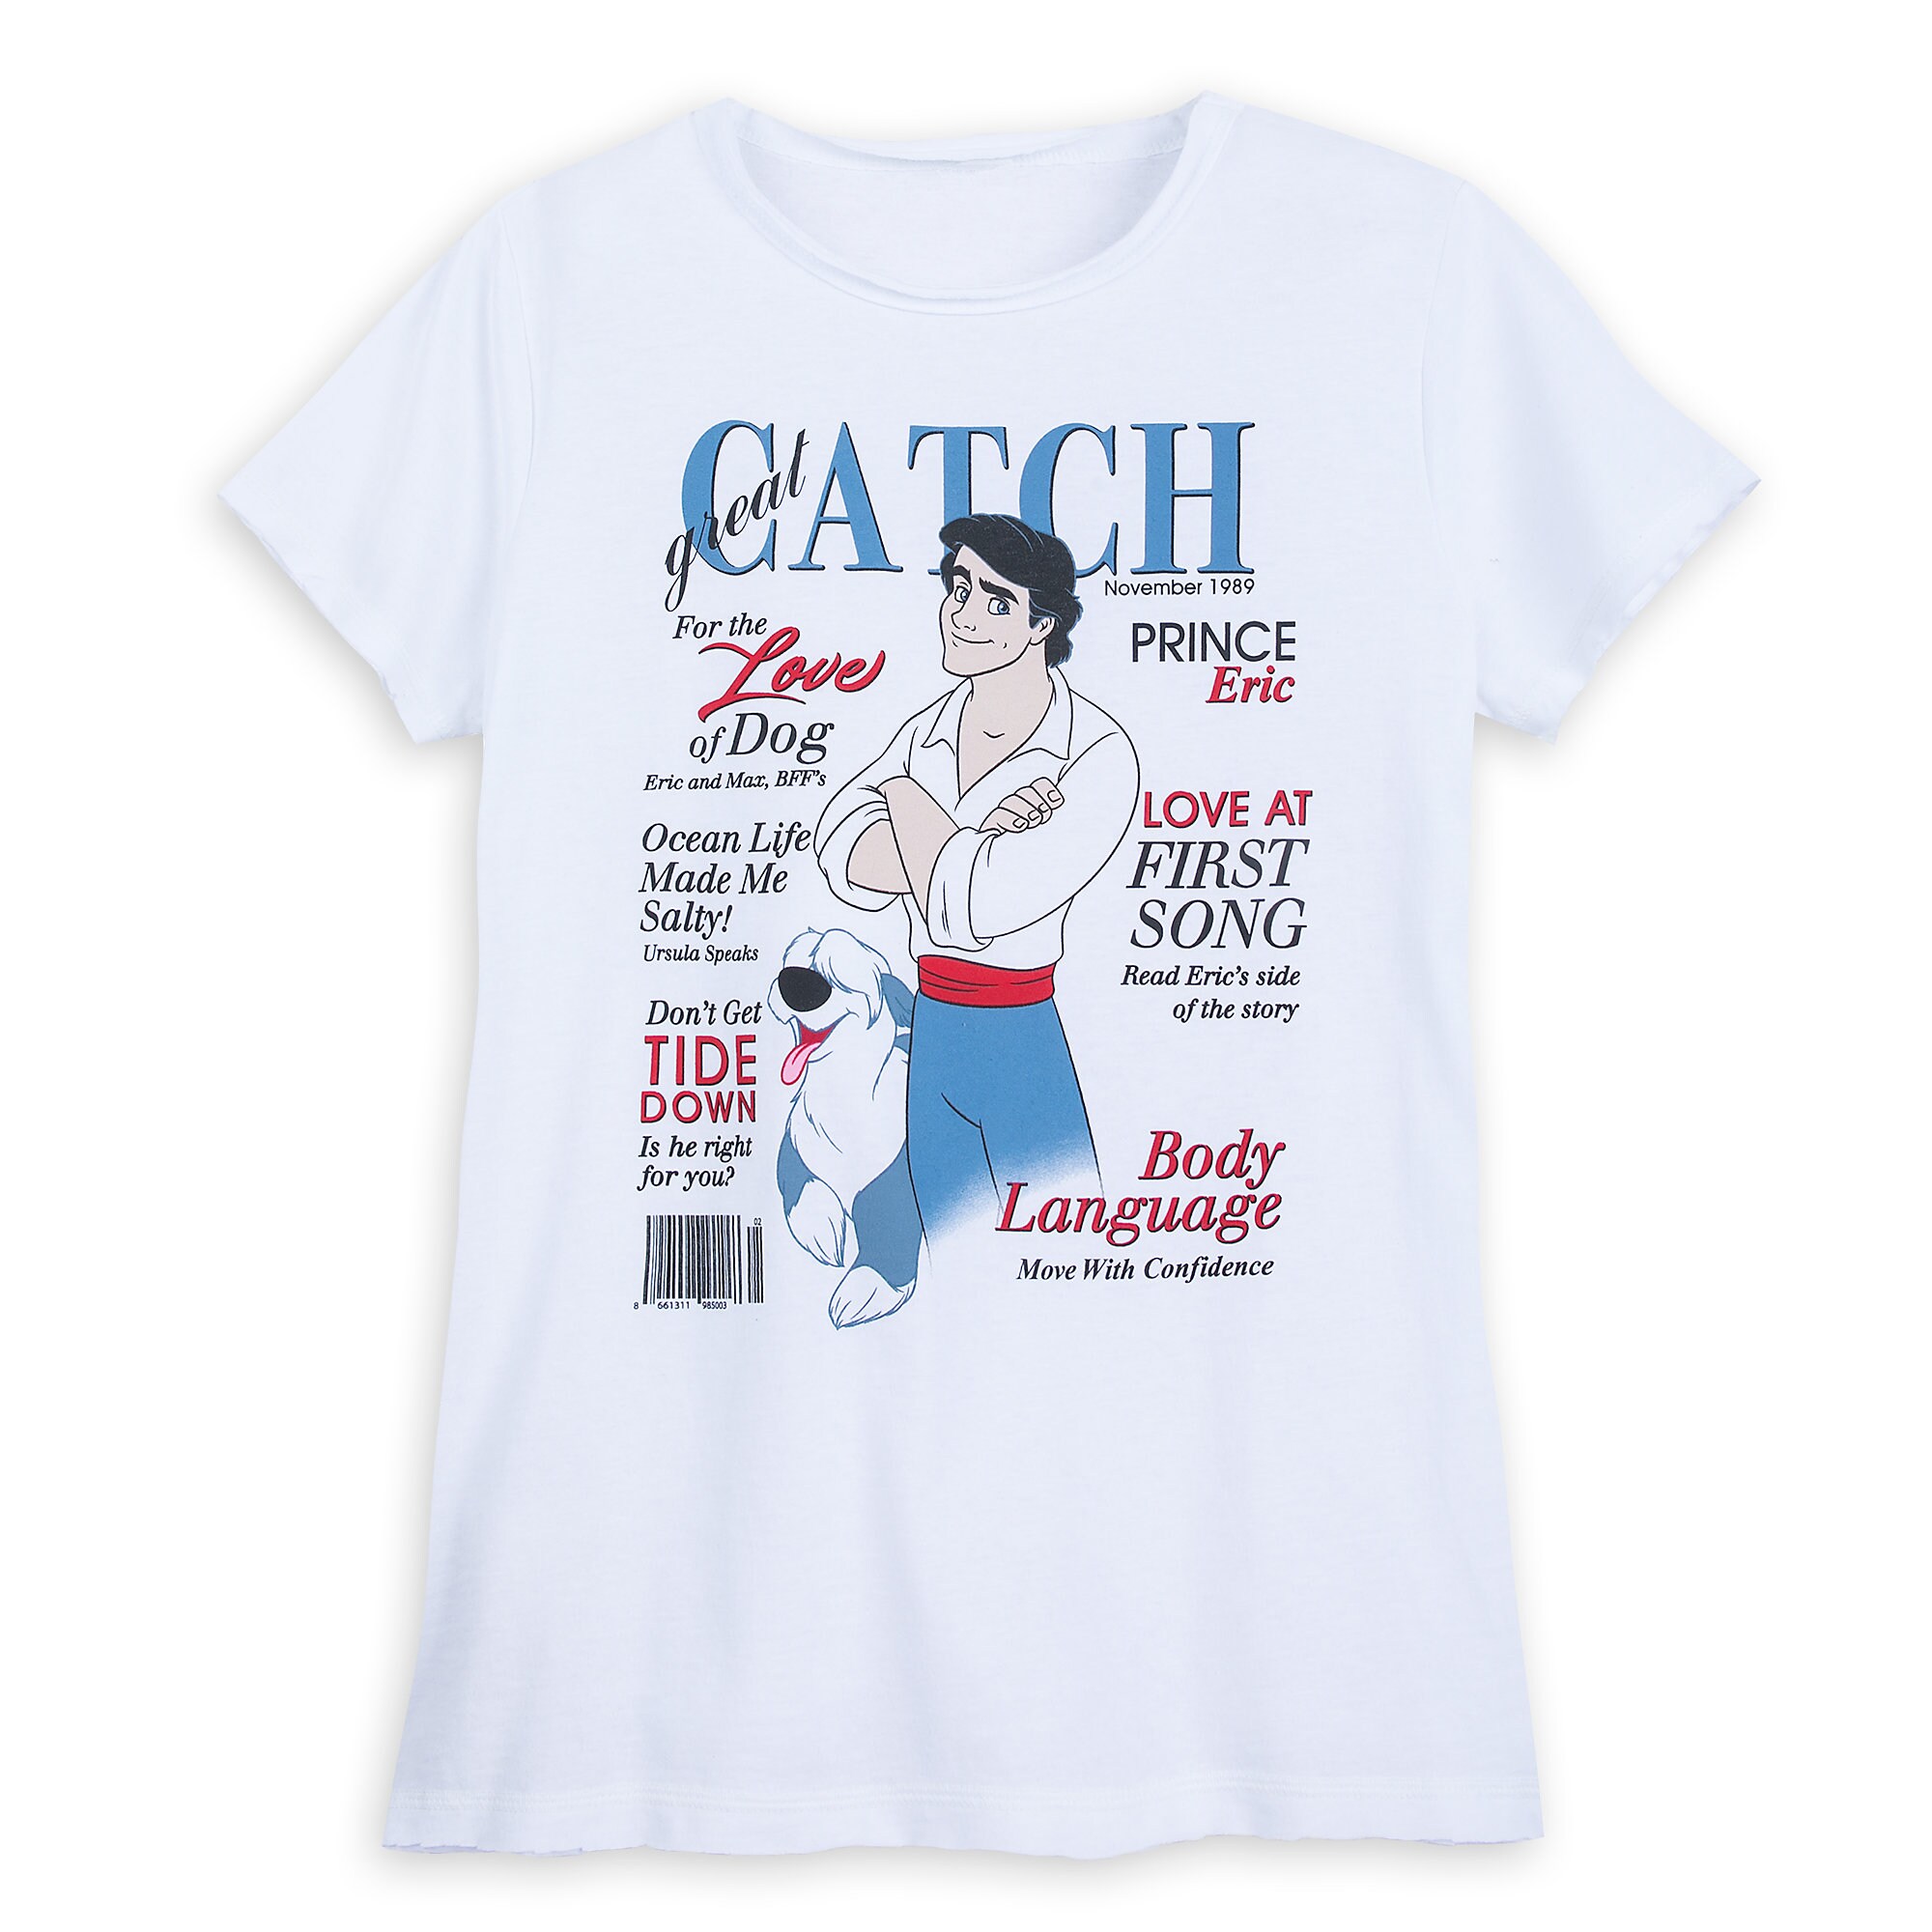 Prince Eric T-Shirt for Women - The Little Mermaid